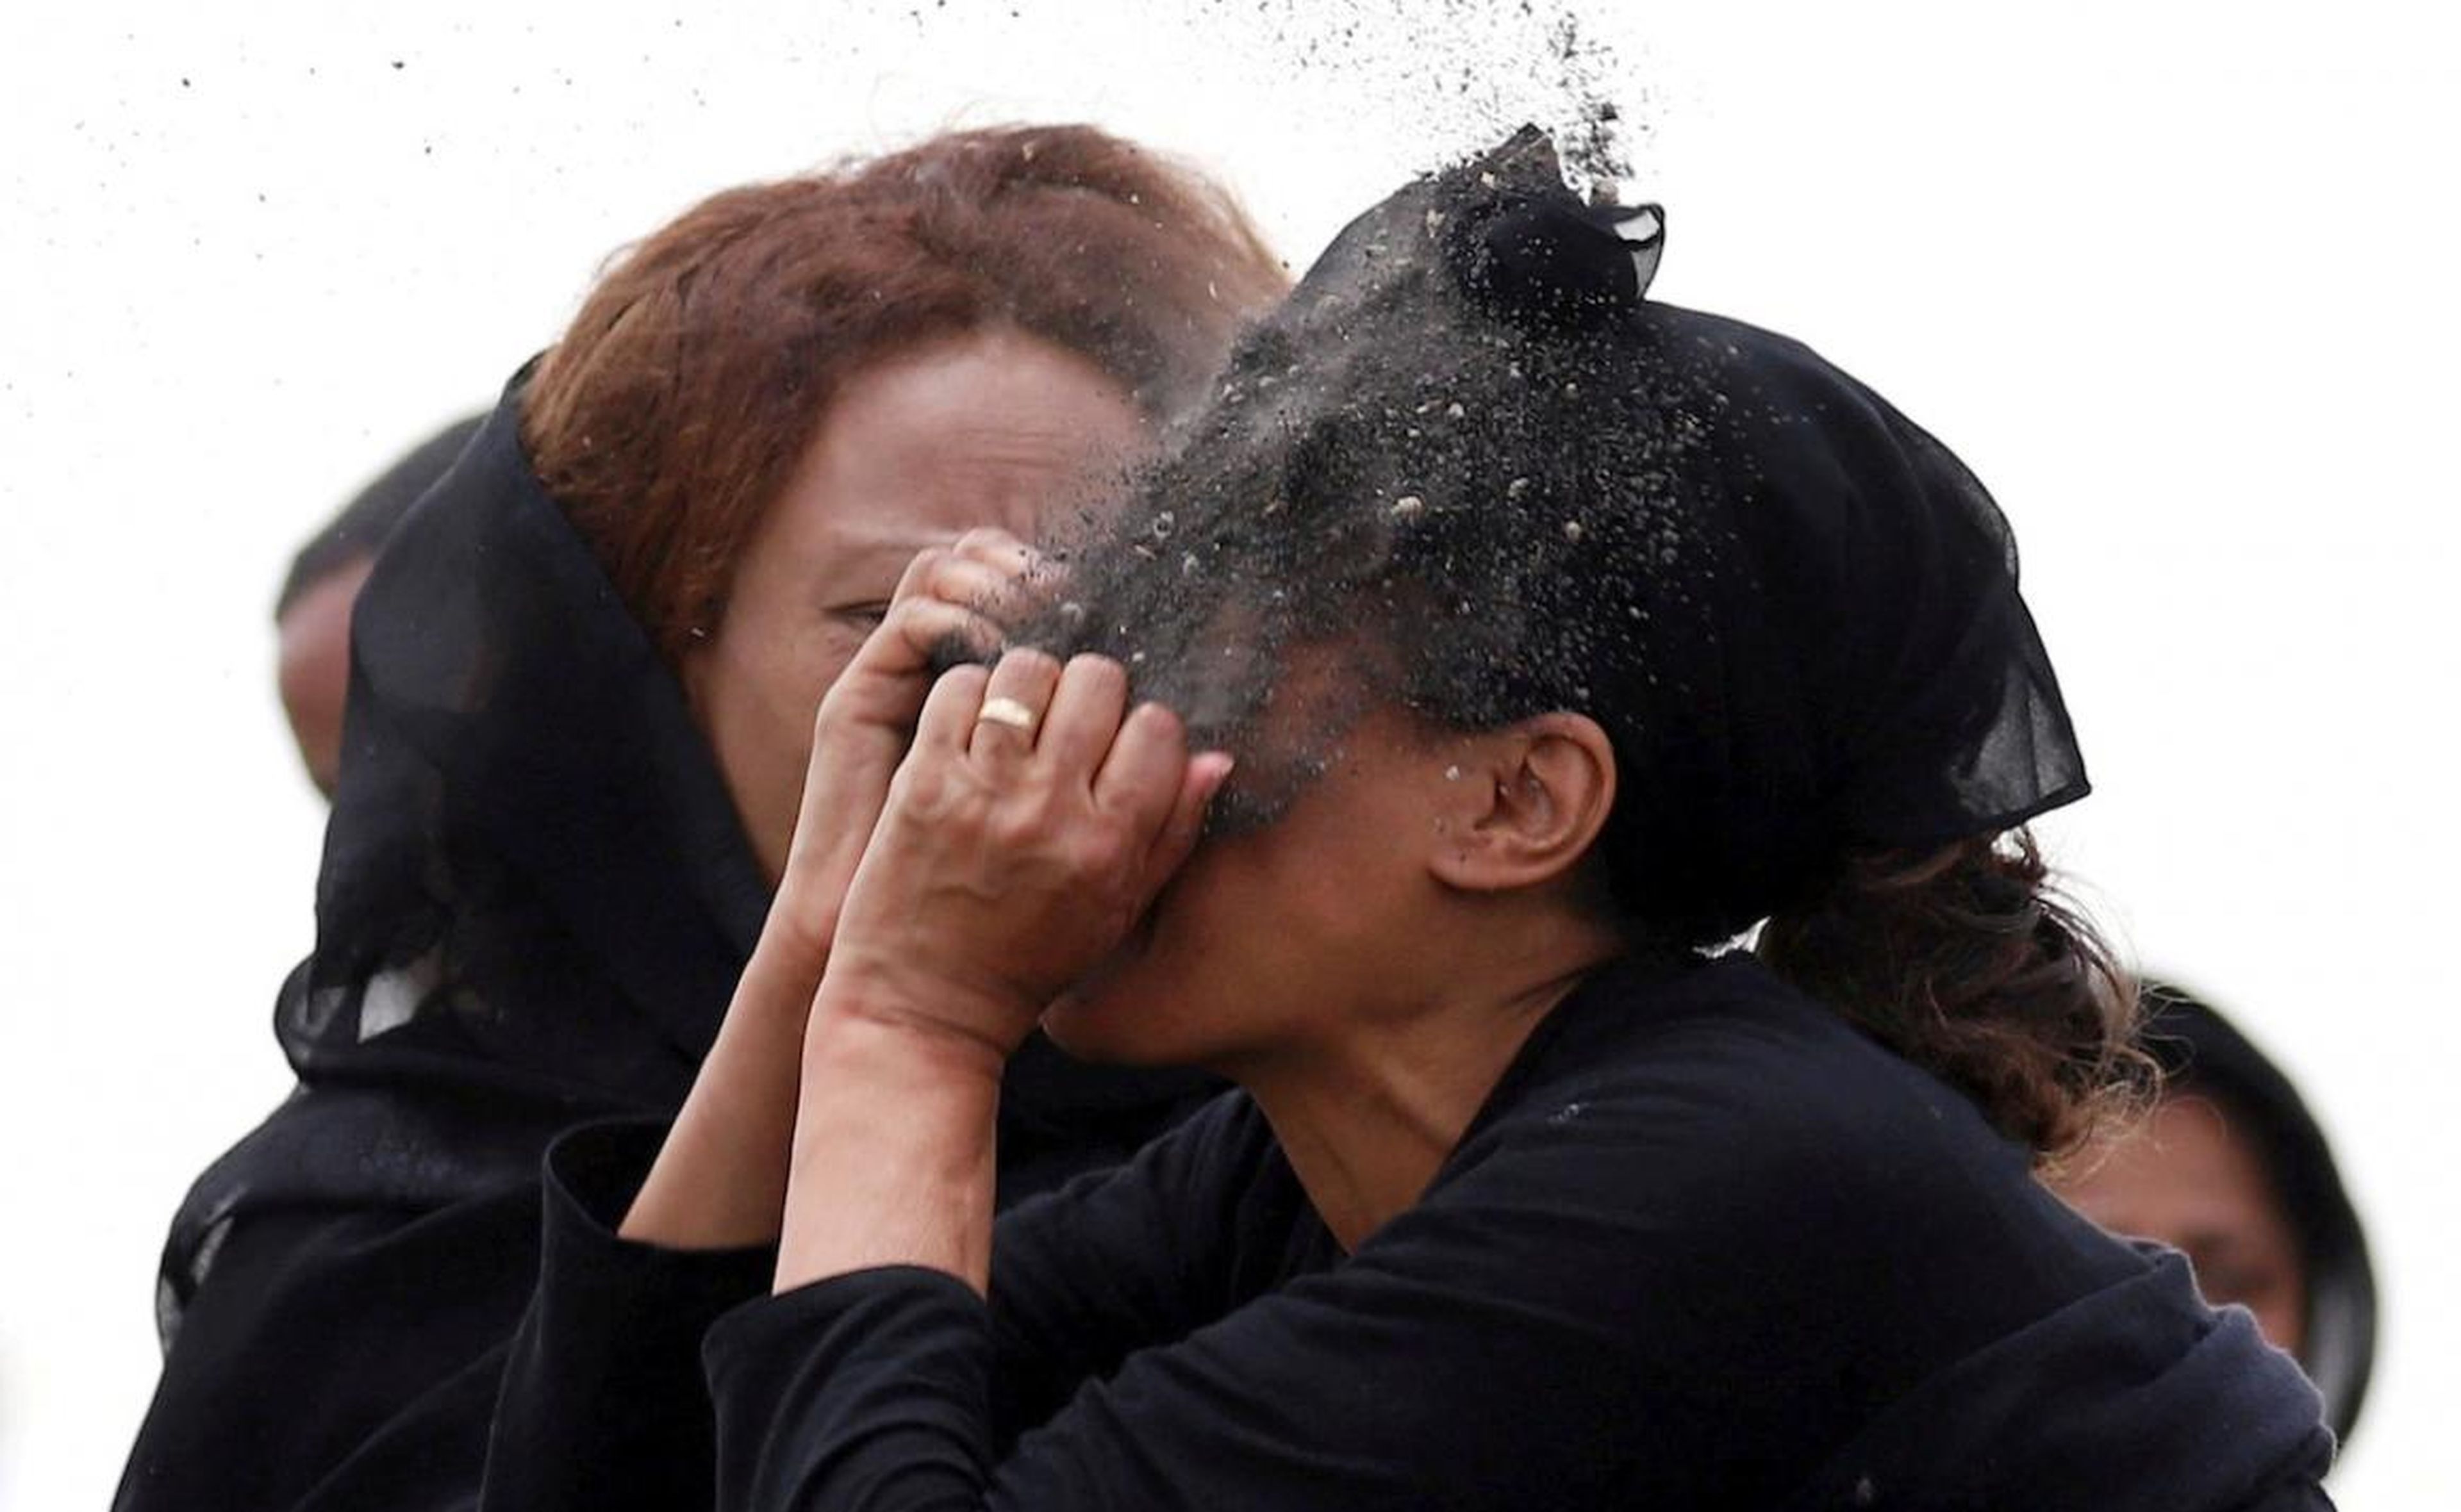 A relative puts soil on her face as she mourns at the scene of the Ethiopian Airlines Flight ET 302 plane crash, near the town Bishoftu, near Addis Ababa, Ethiopia, on March 14.